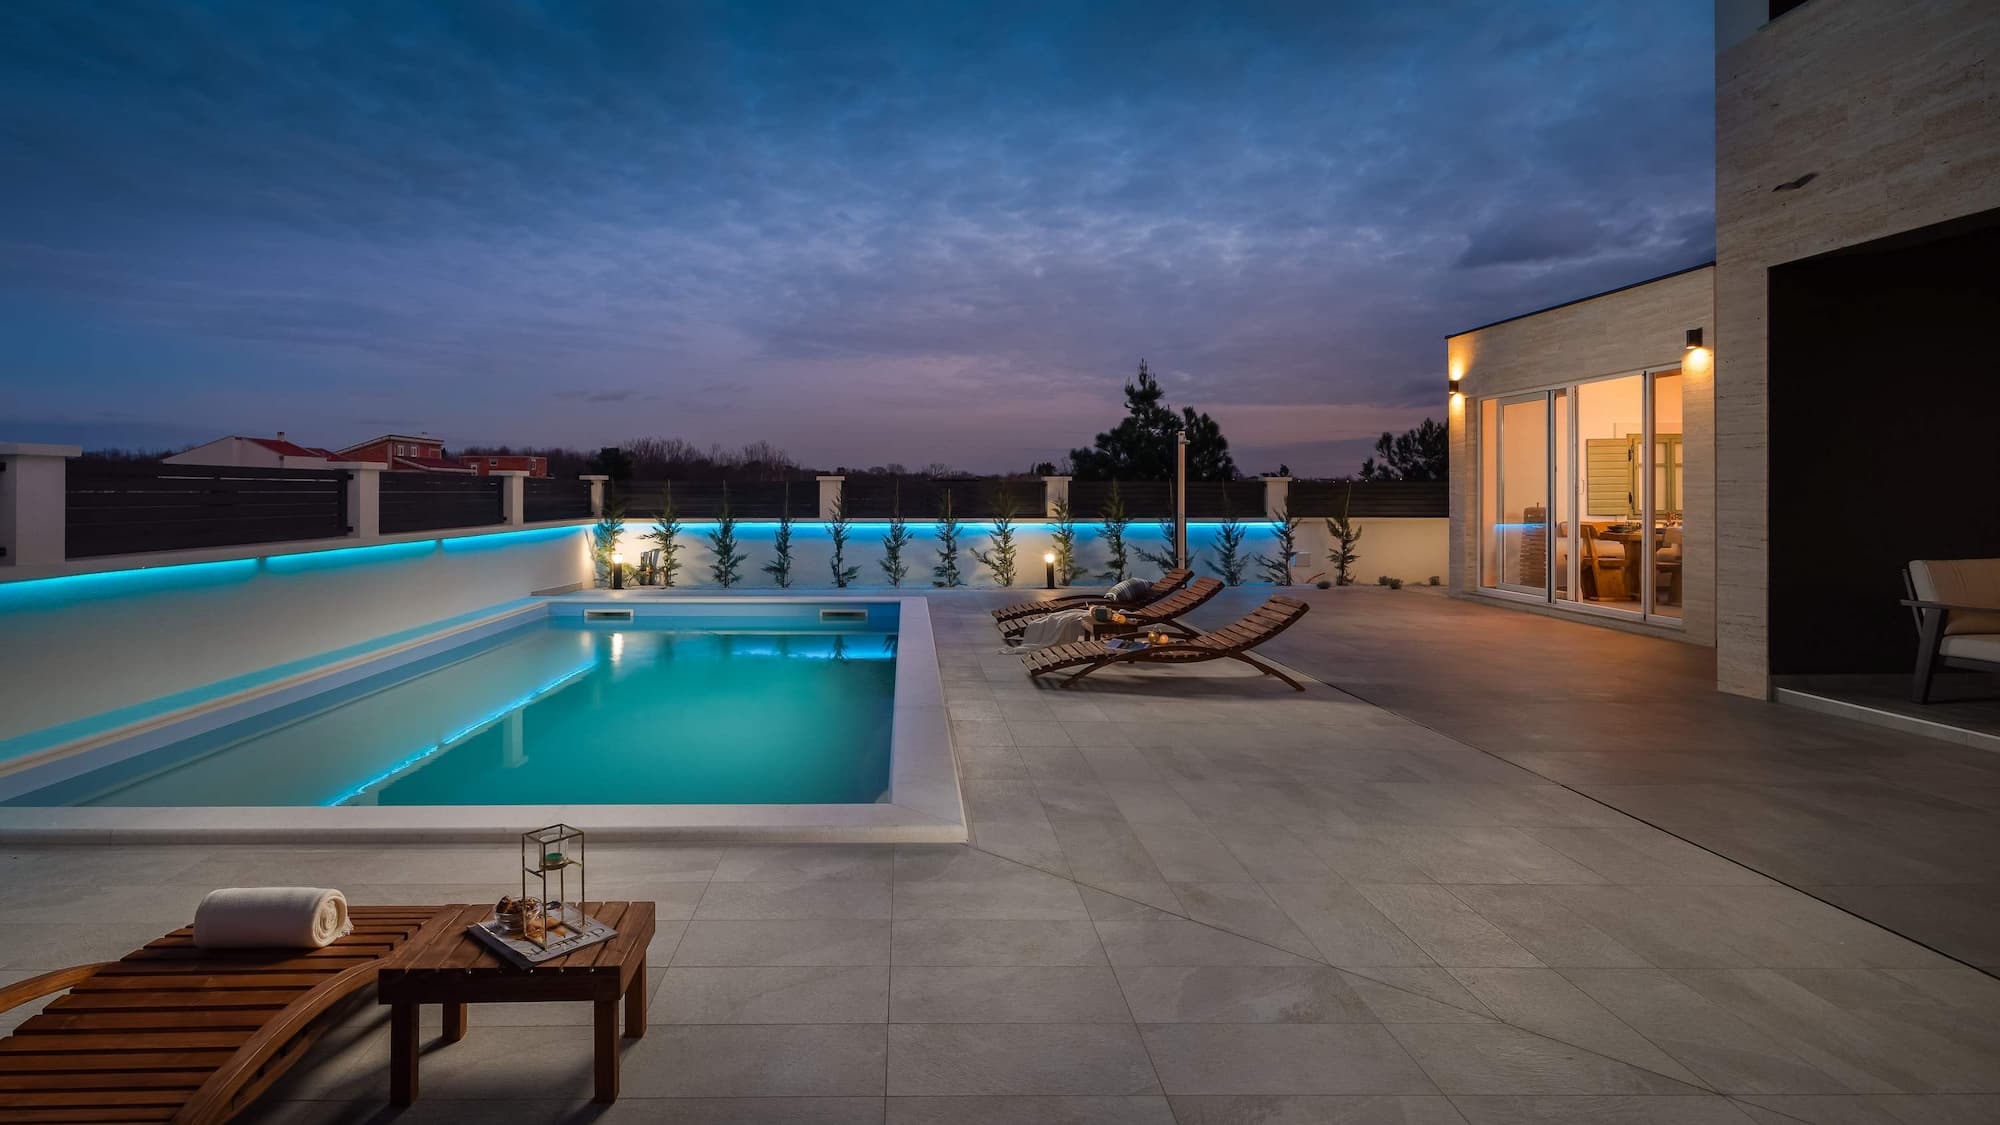 Swimming pool with sun loungers and blue night lighting